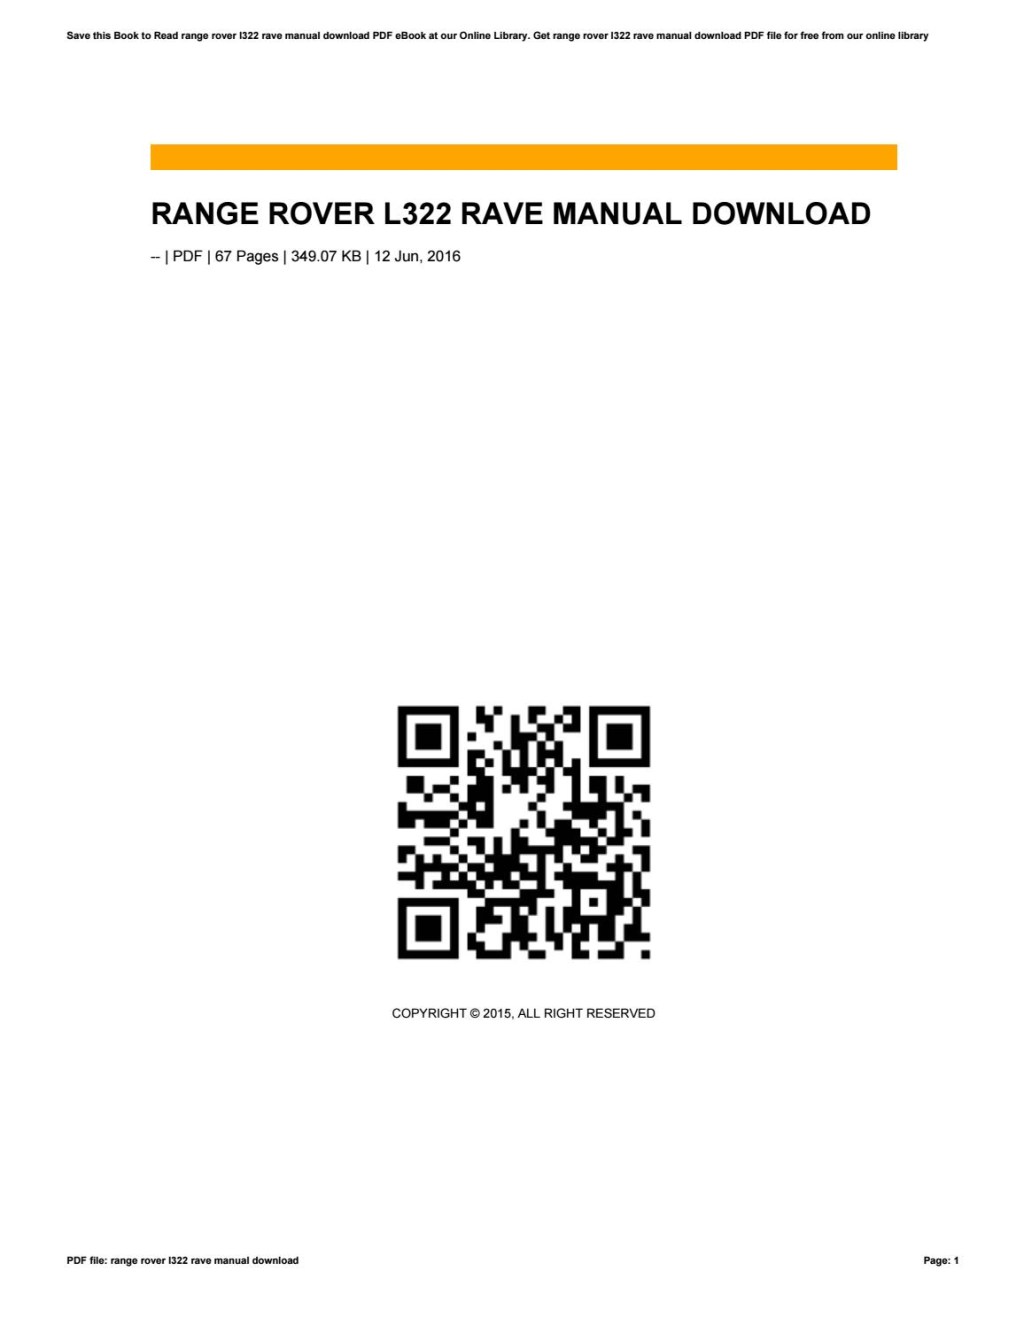 Picture of: Range rover l rave manual download by jklasdf – Issuu